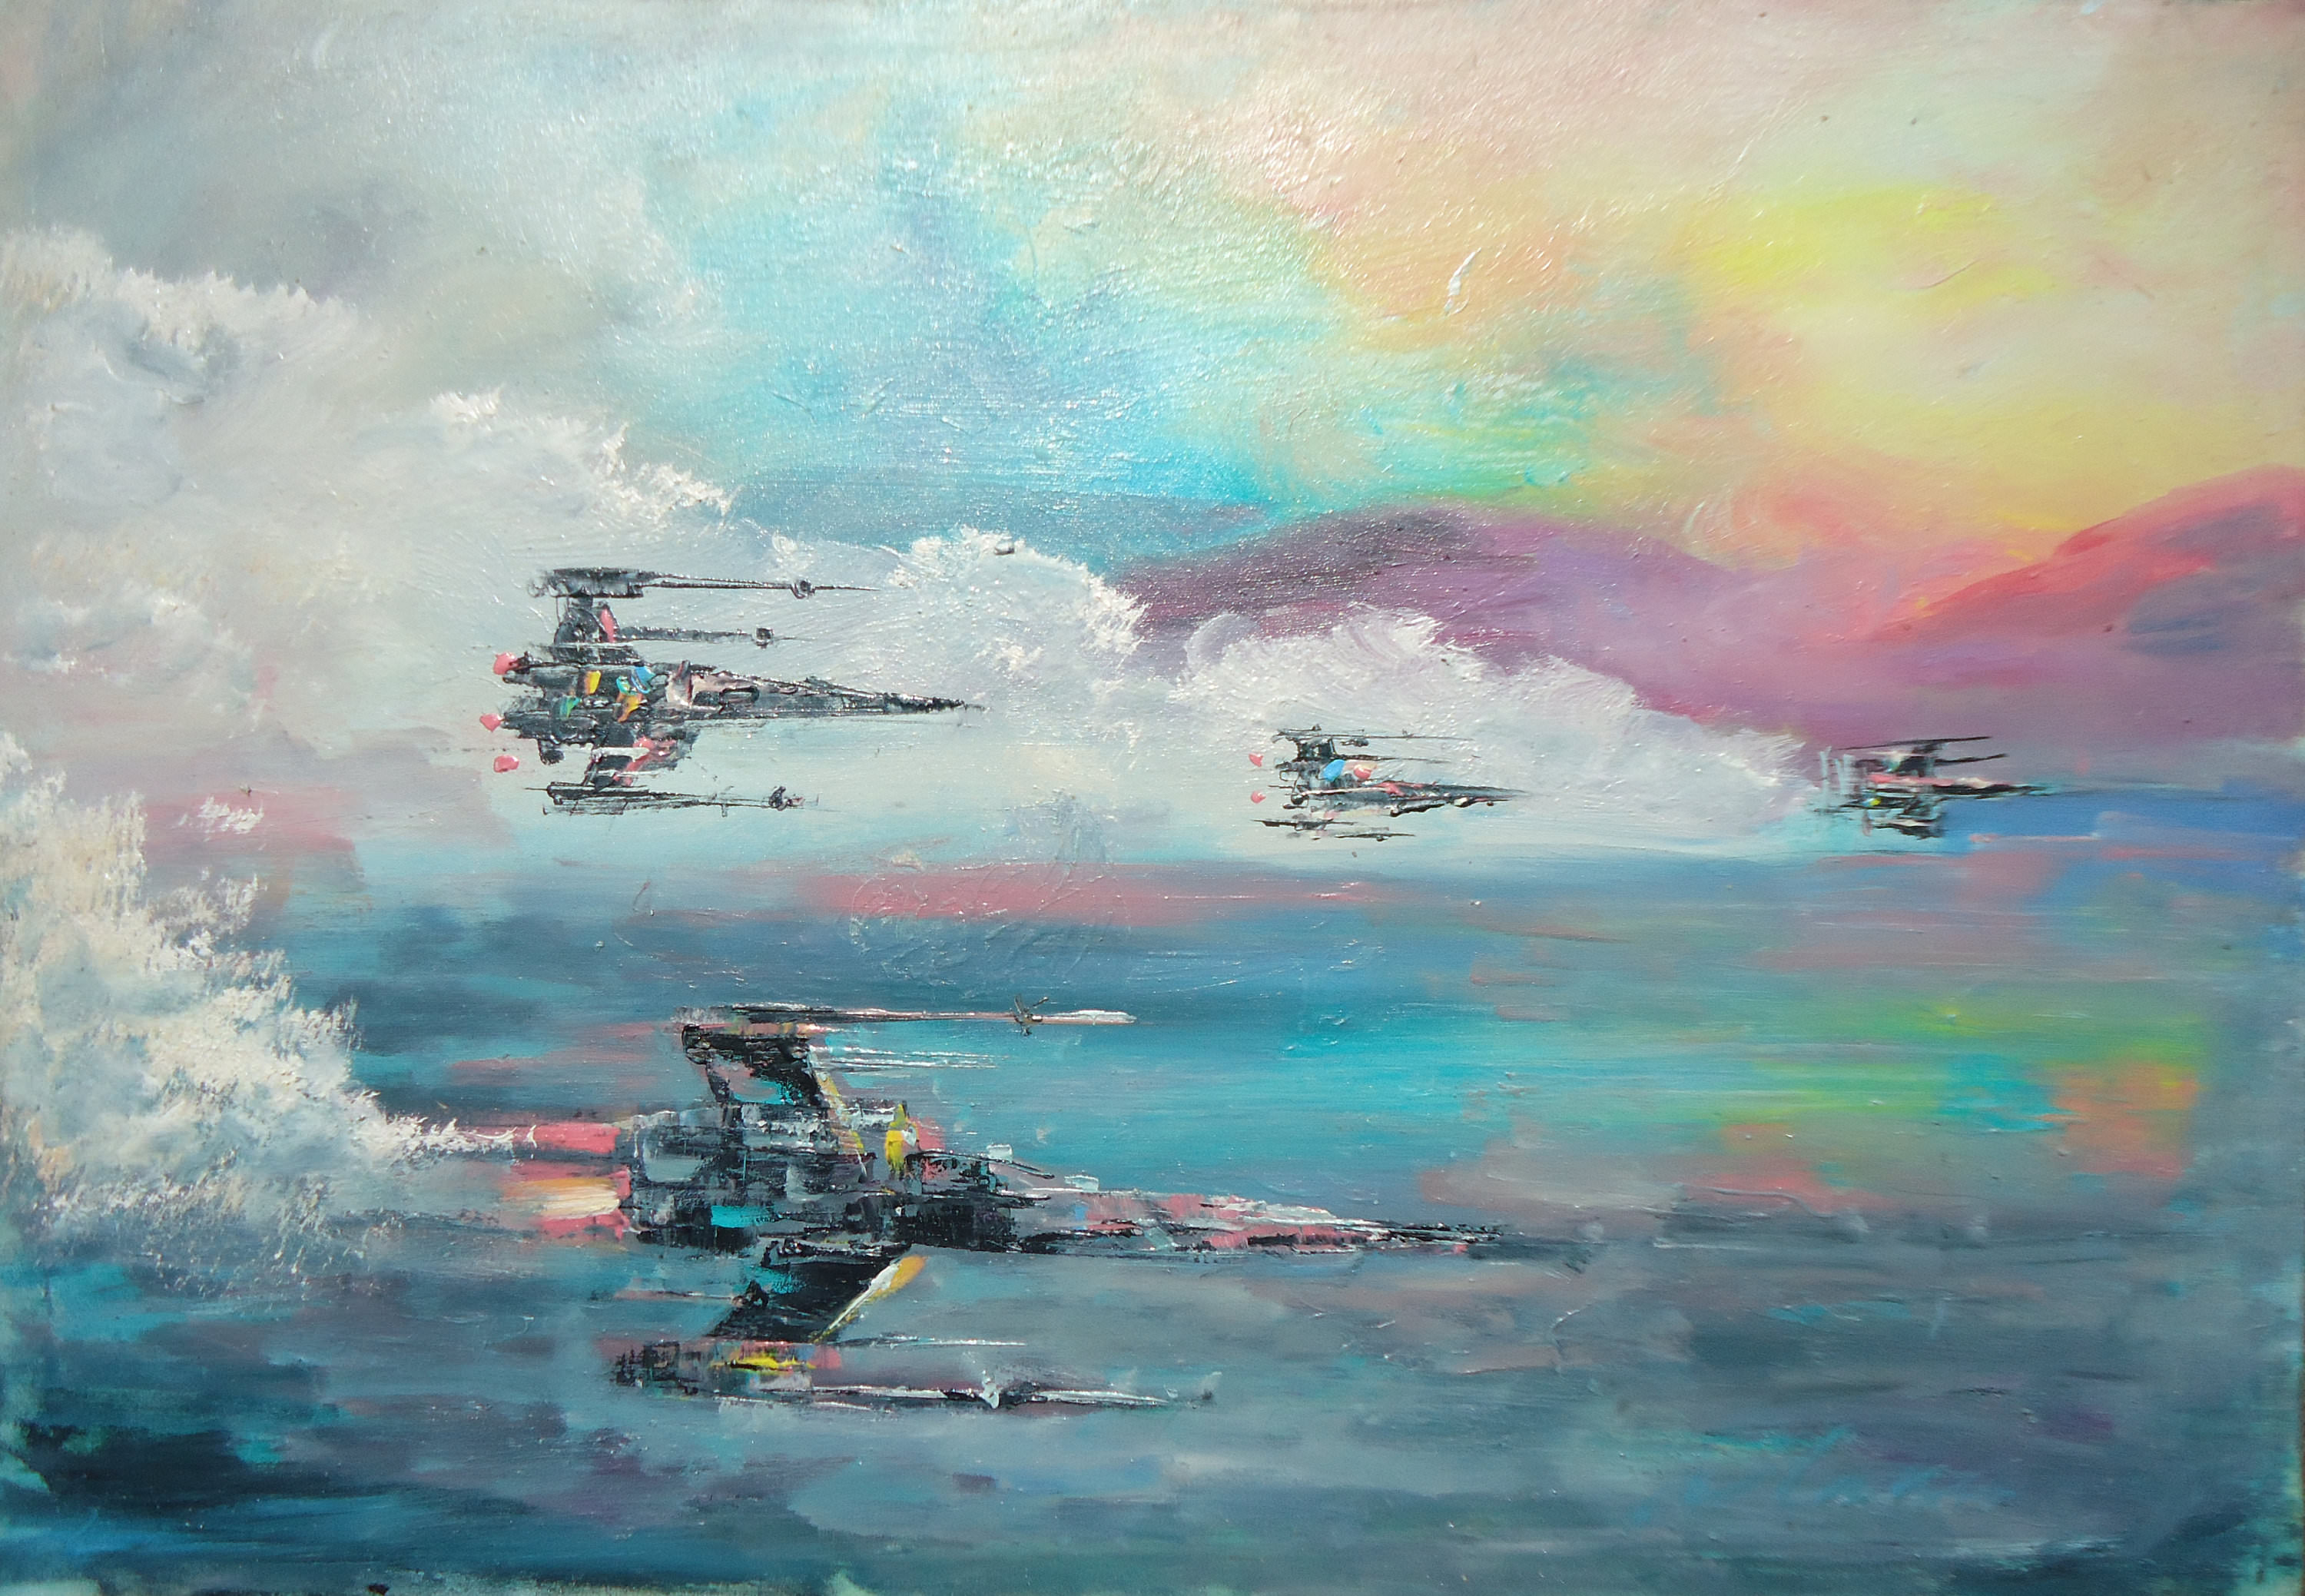 X-Wing Fighter painting by me. - Album on Imgur